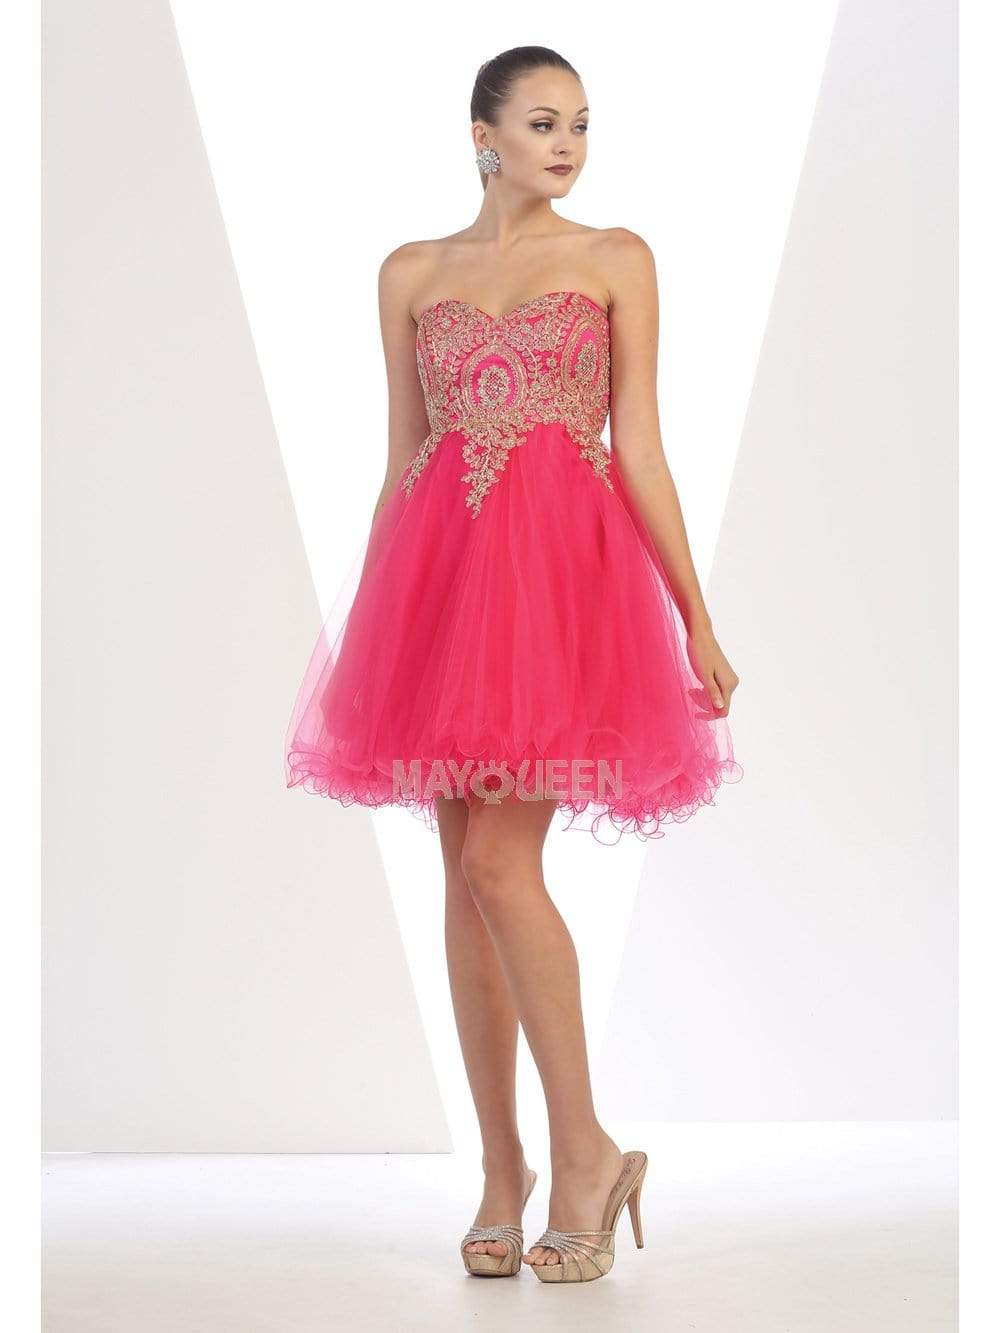 May Queen - MQ1414 Lace Appliqued Strapless Sweetheart Cocktail Dress Homecoming Dresses 2 / Fuchsia